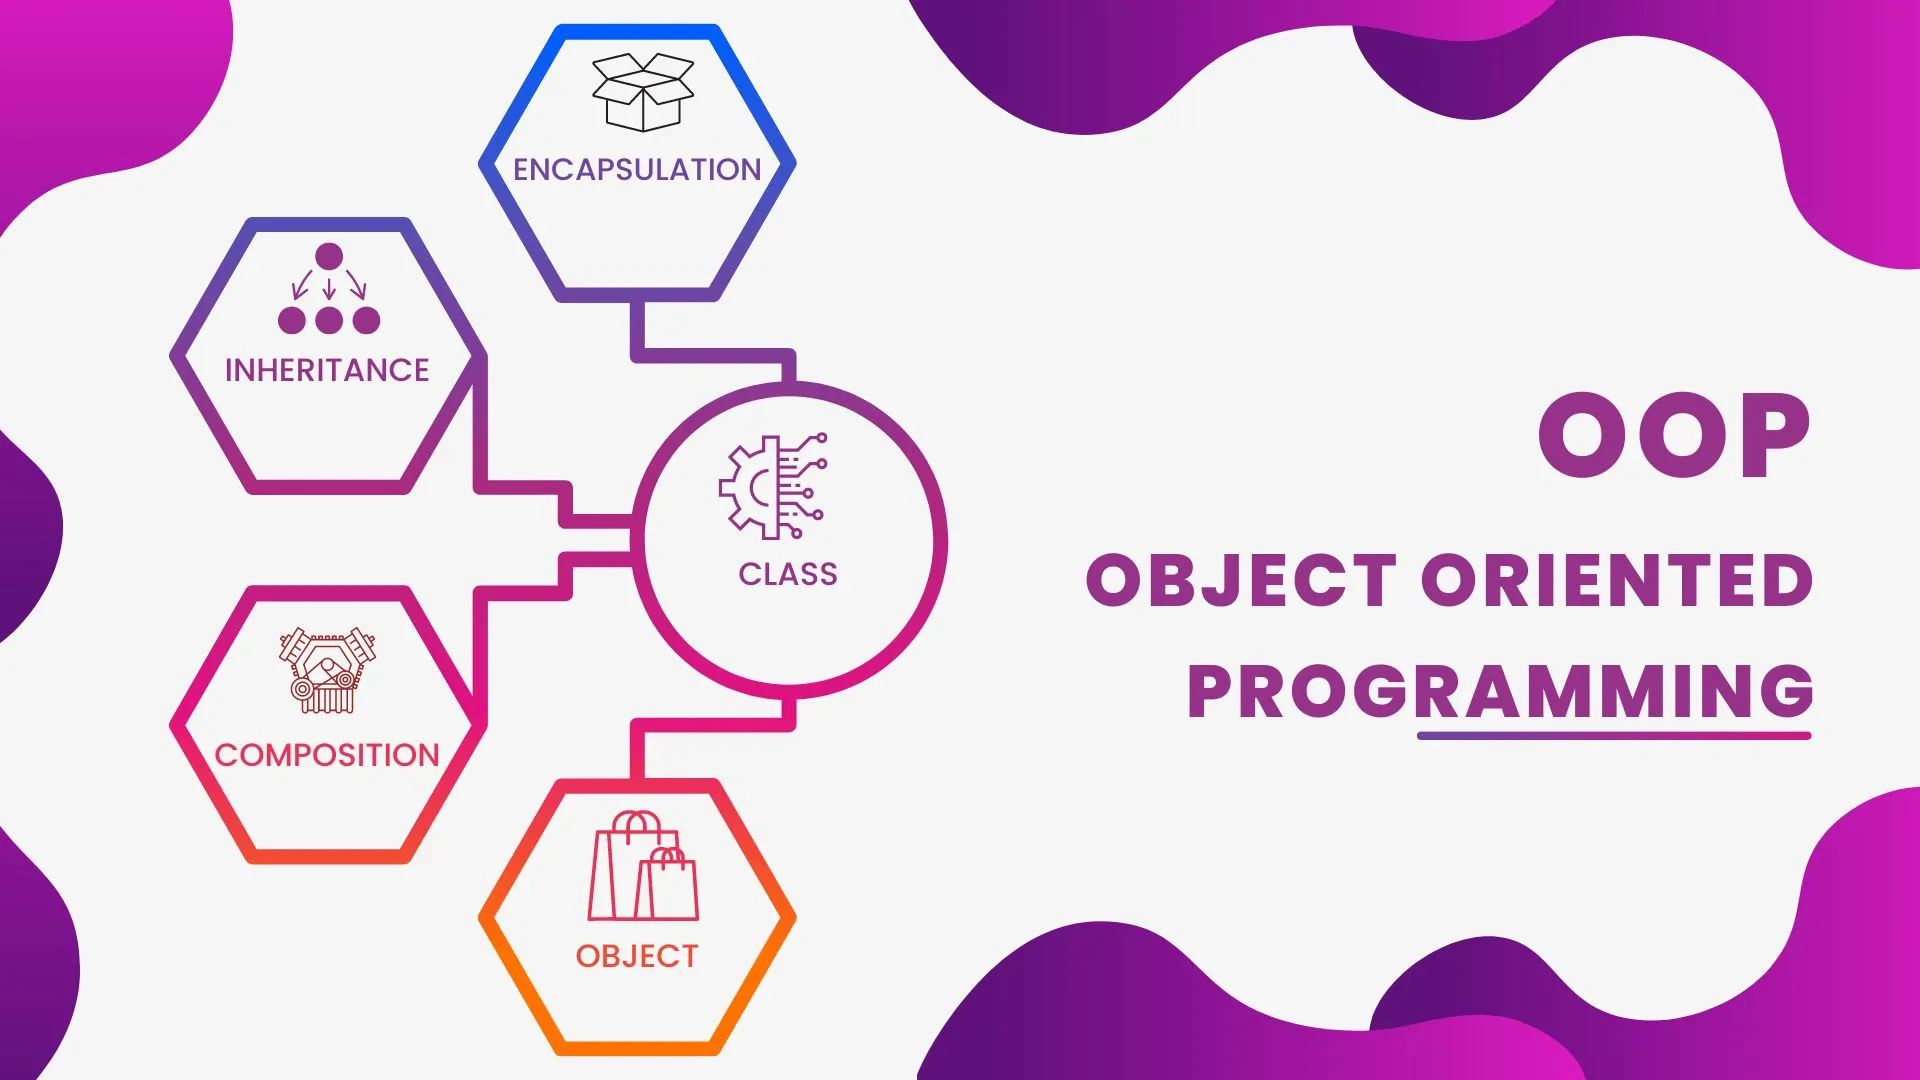 What is OOP - Object Oriented Programming